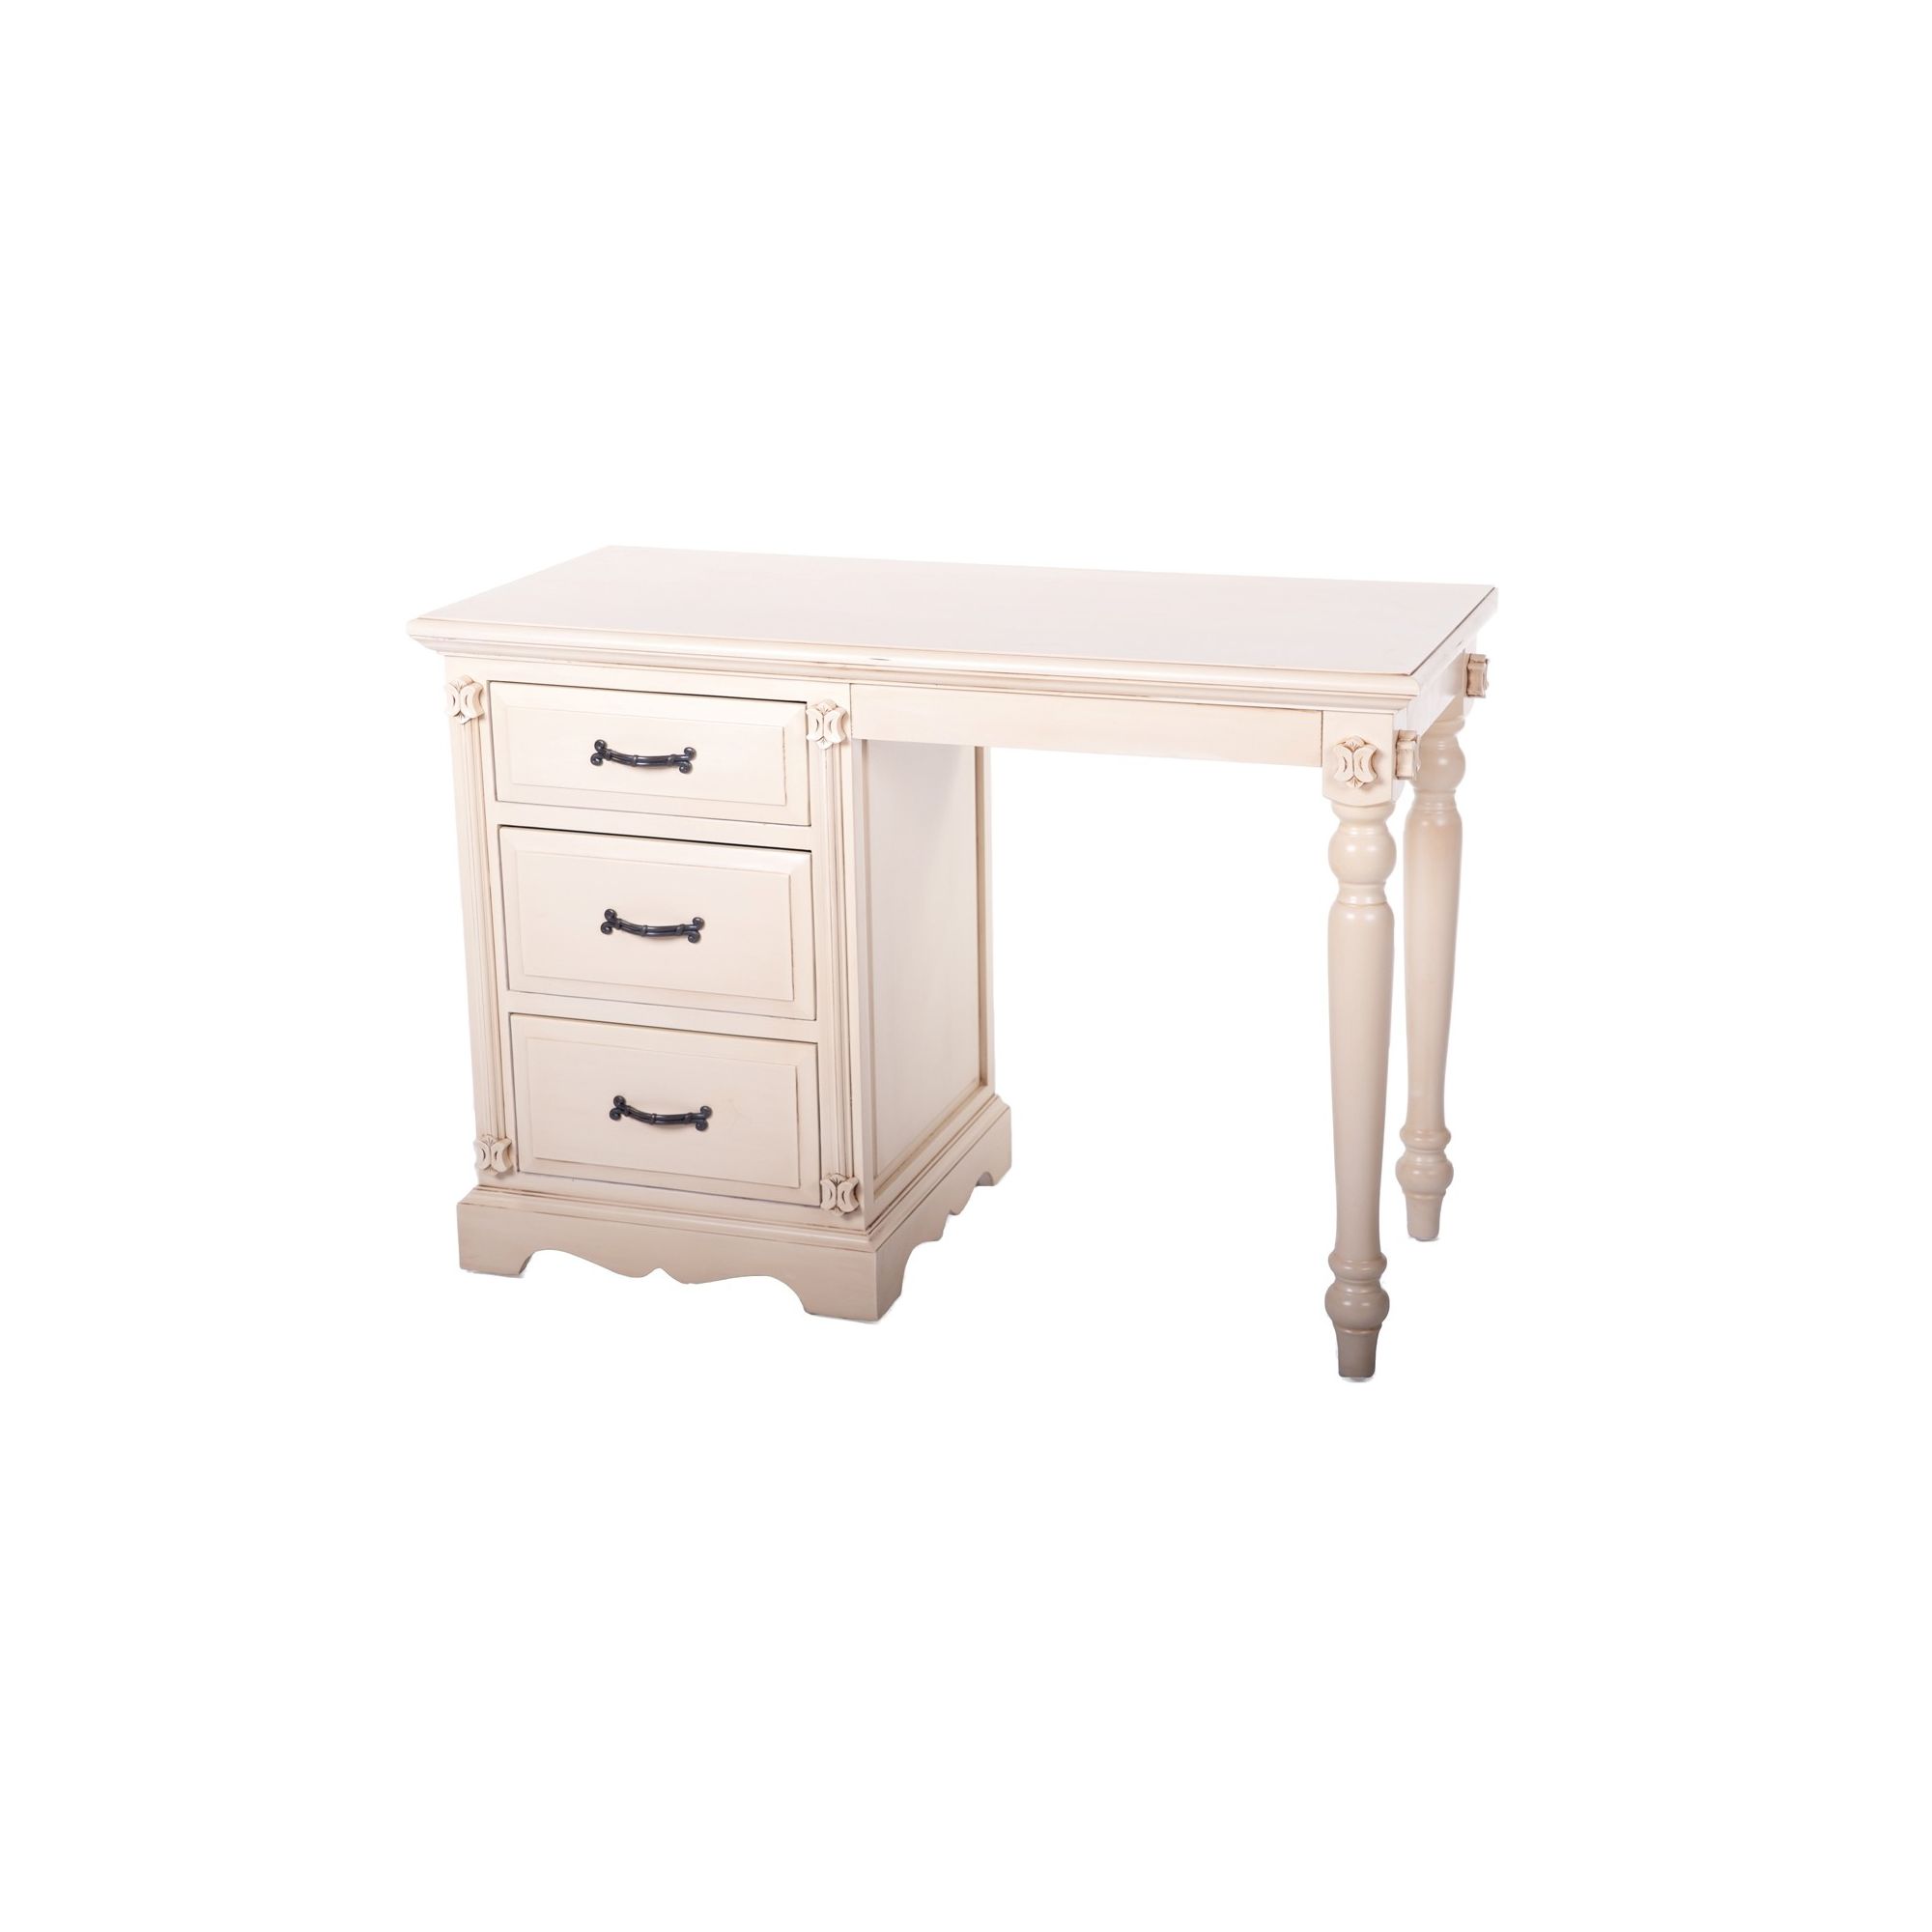 Thorndon Beverley Dressing Table at Tesco Direct